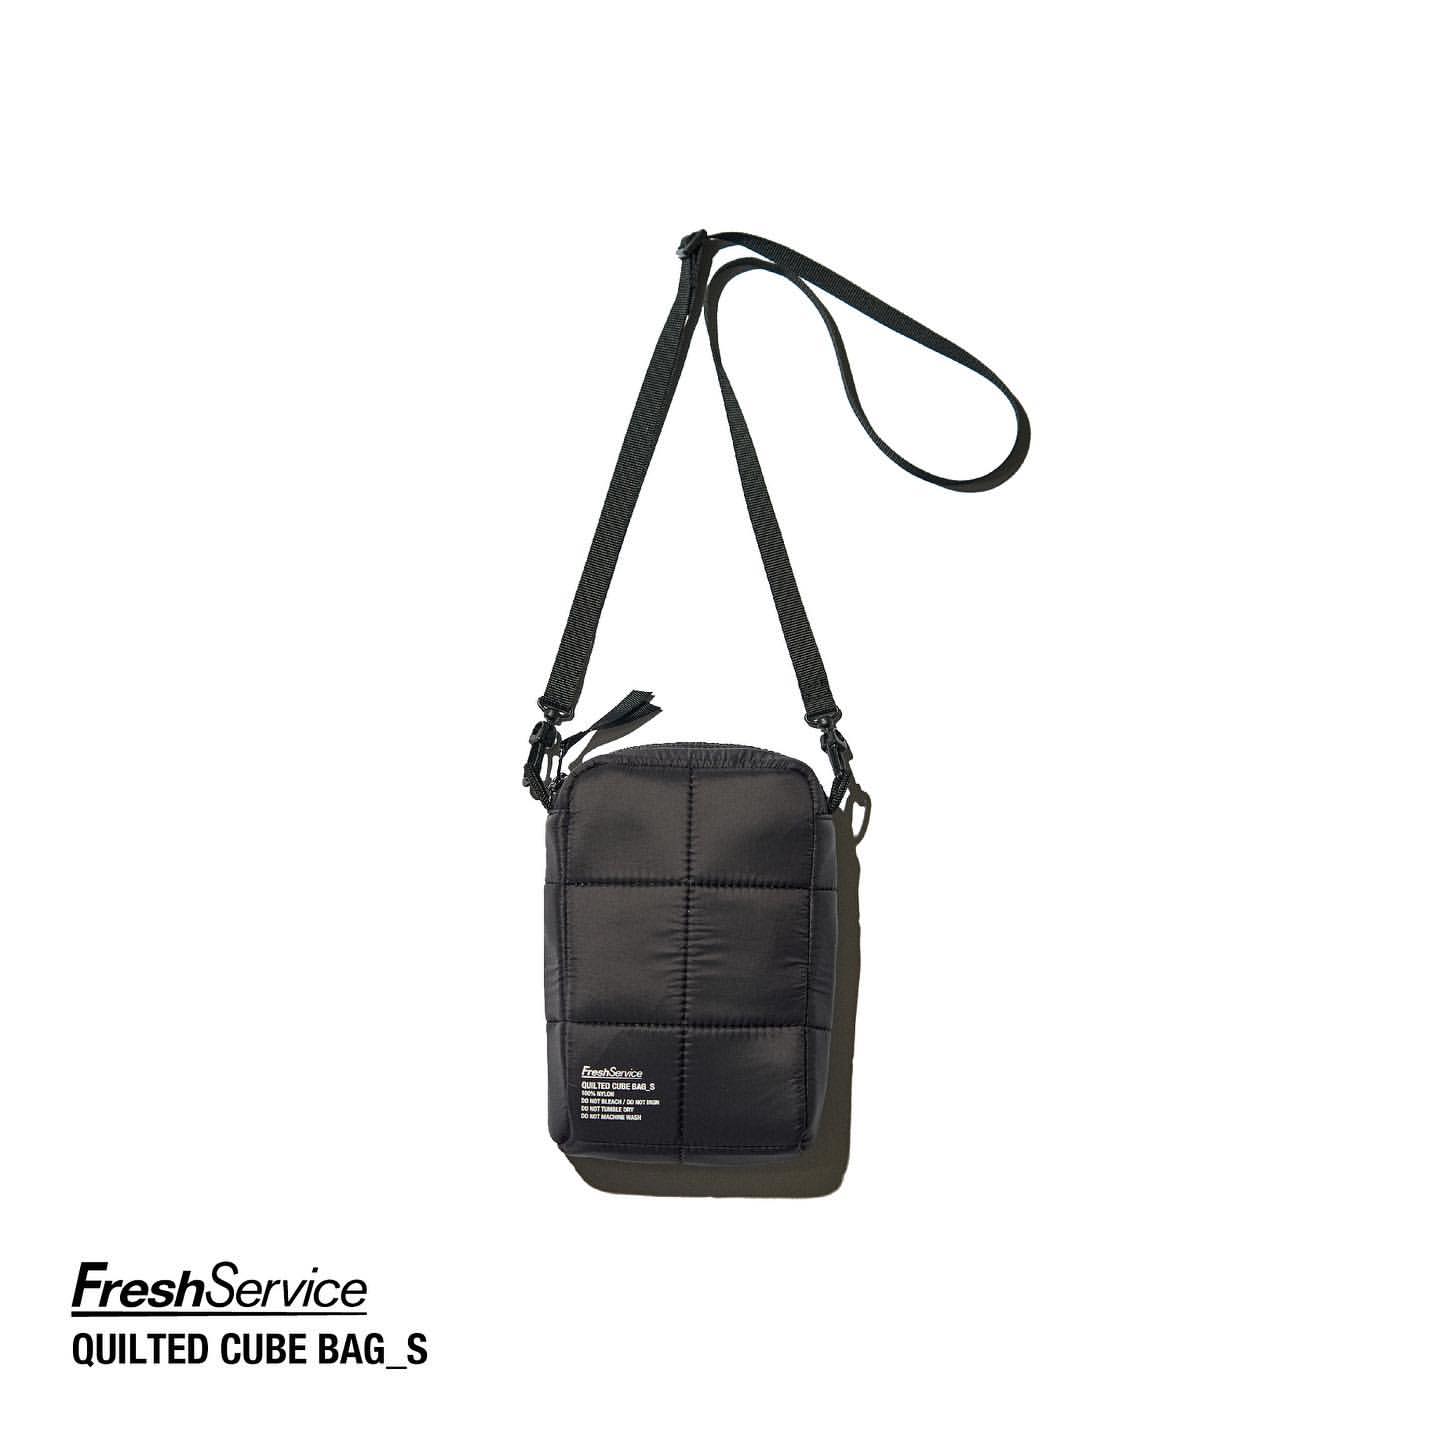 FreshService/QUILTED CUBE BAG_S